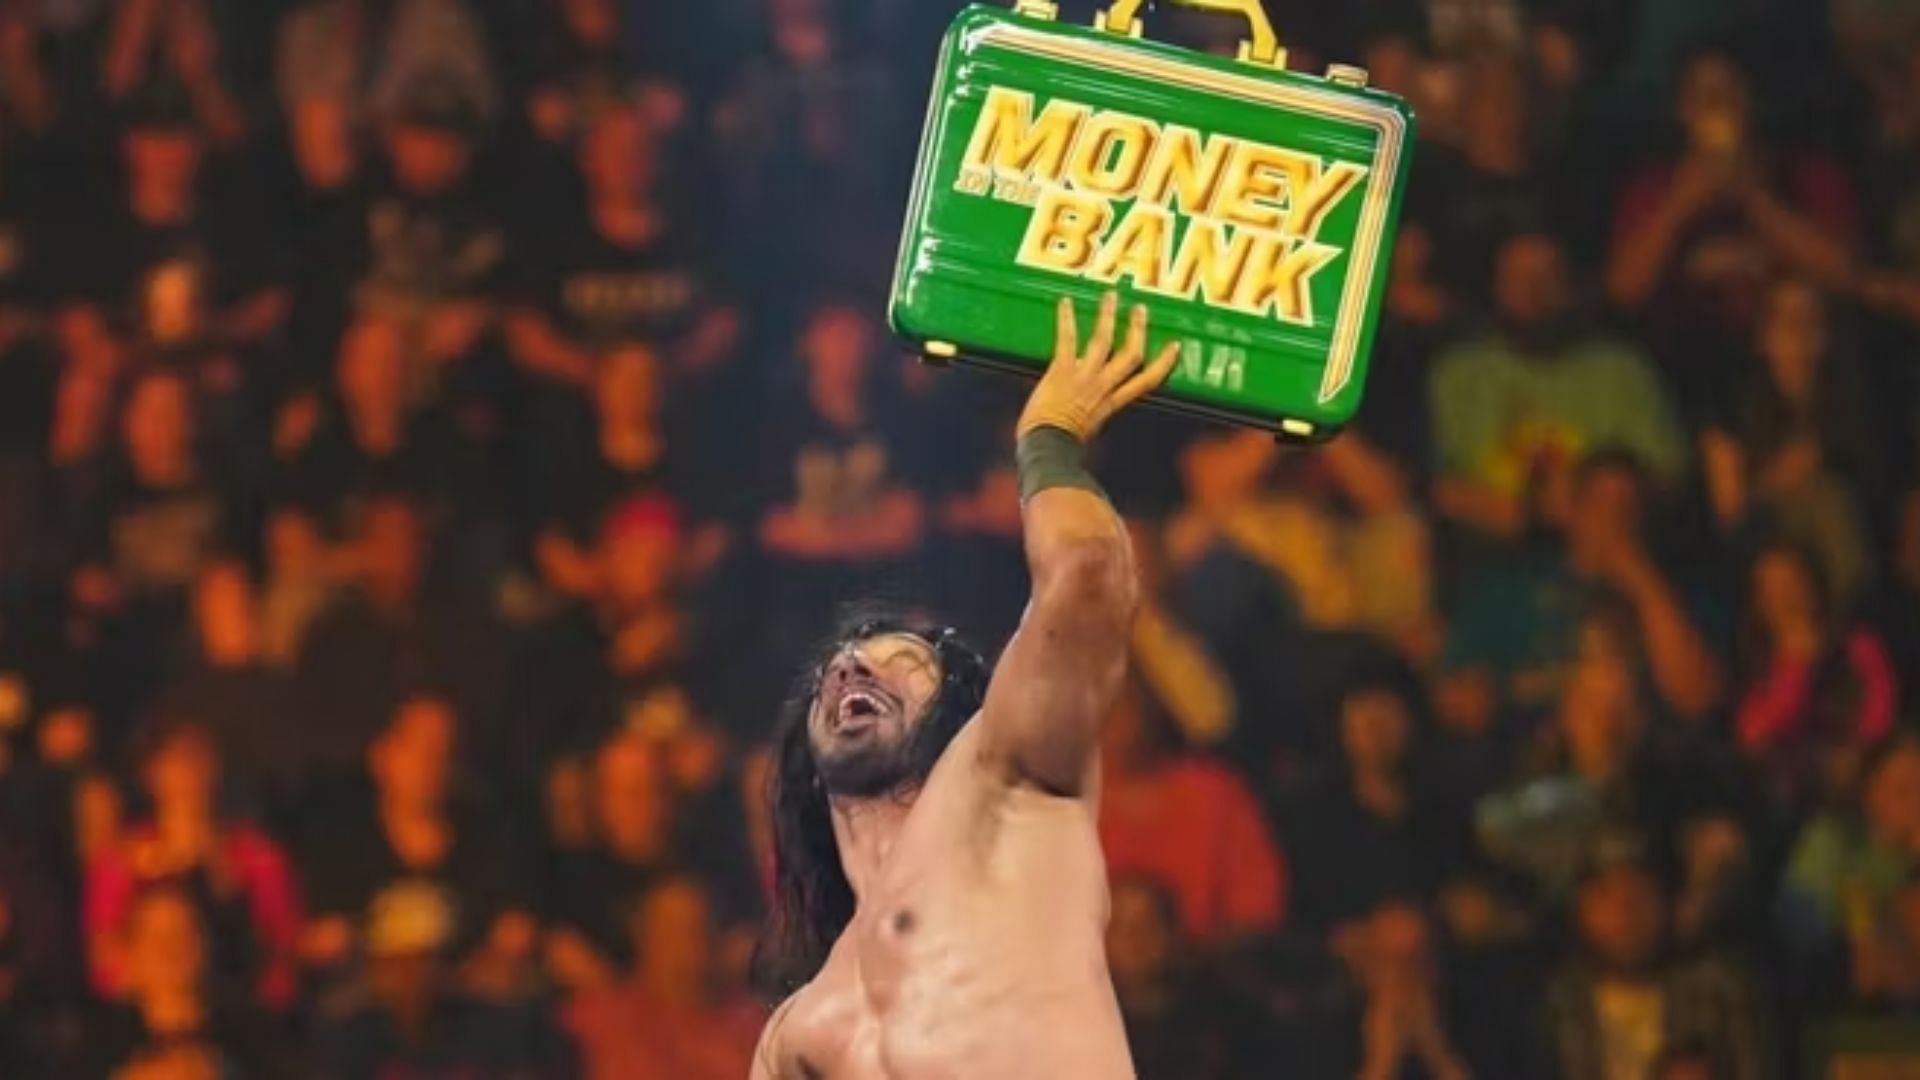 Ali came close to winning the Money in the Bank contract in 2019.